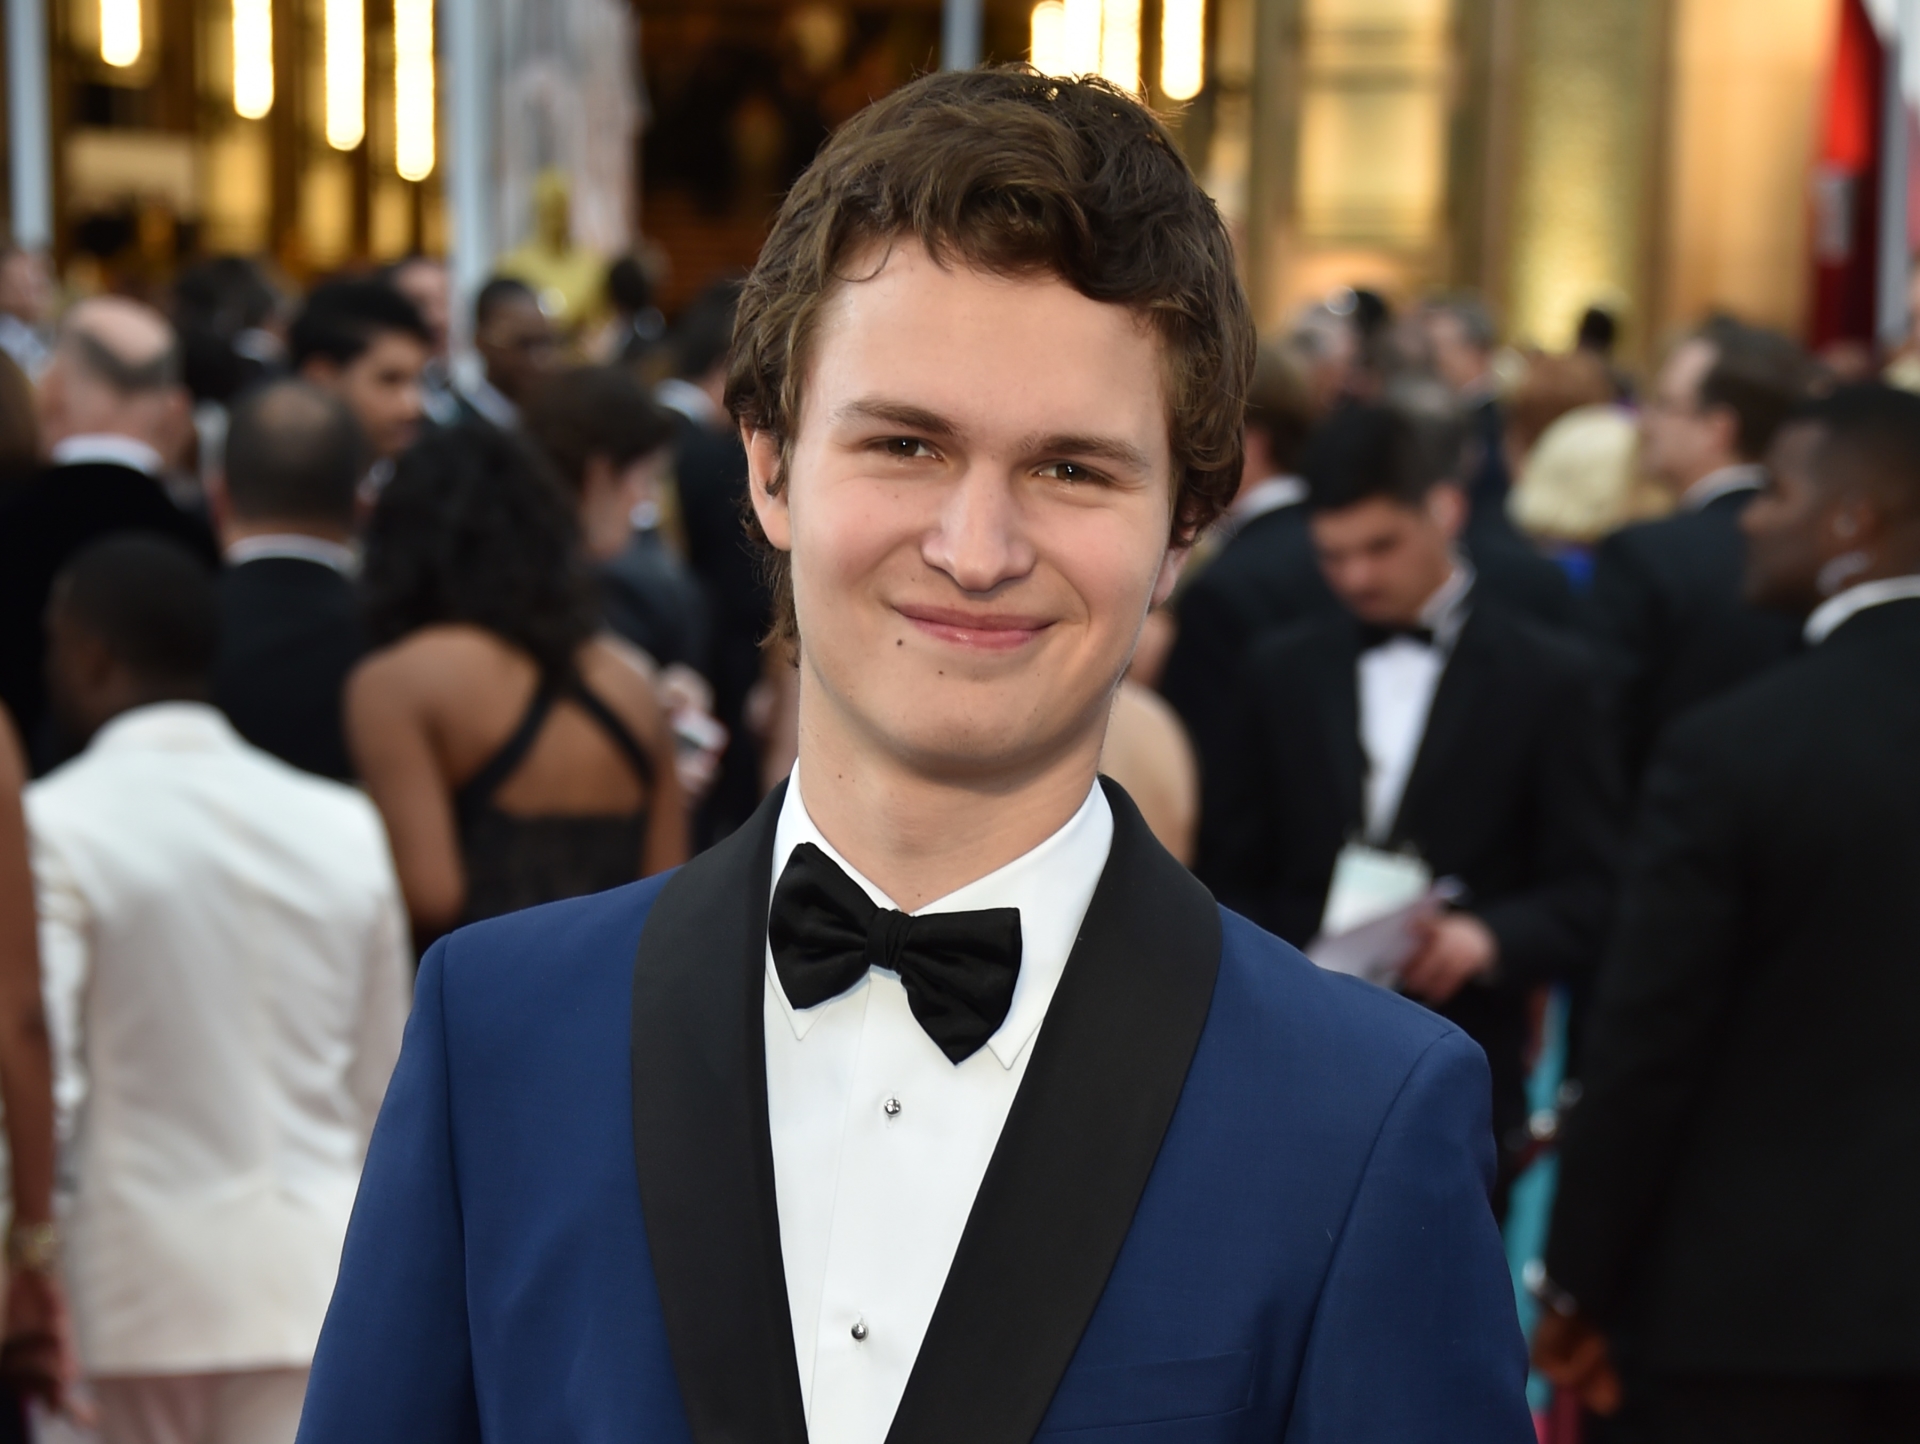 Ansel Elgort arriving at an event